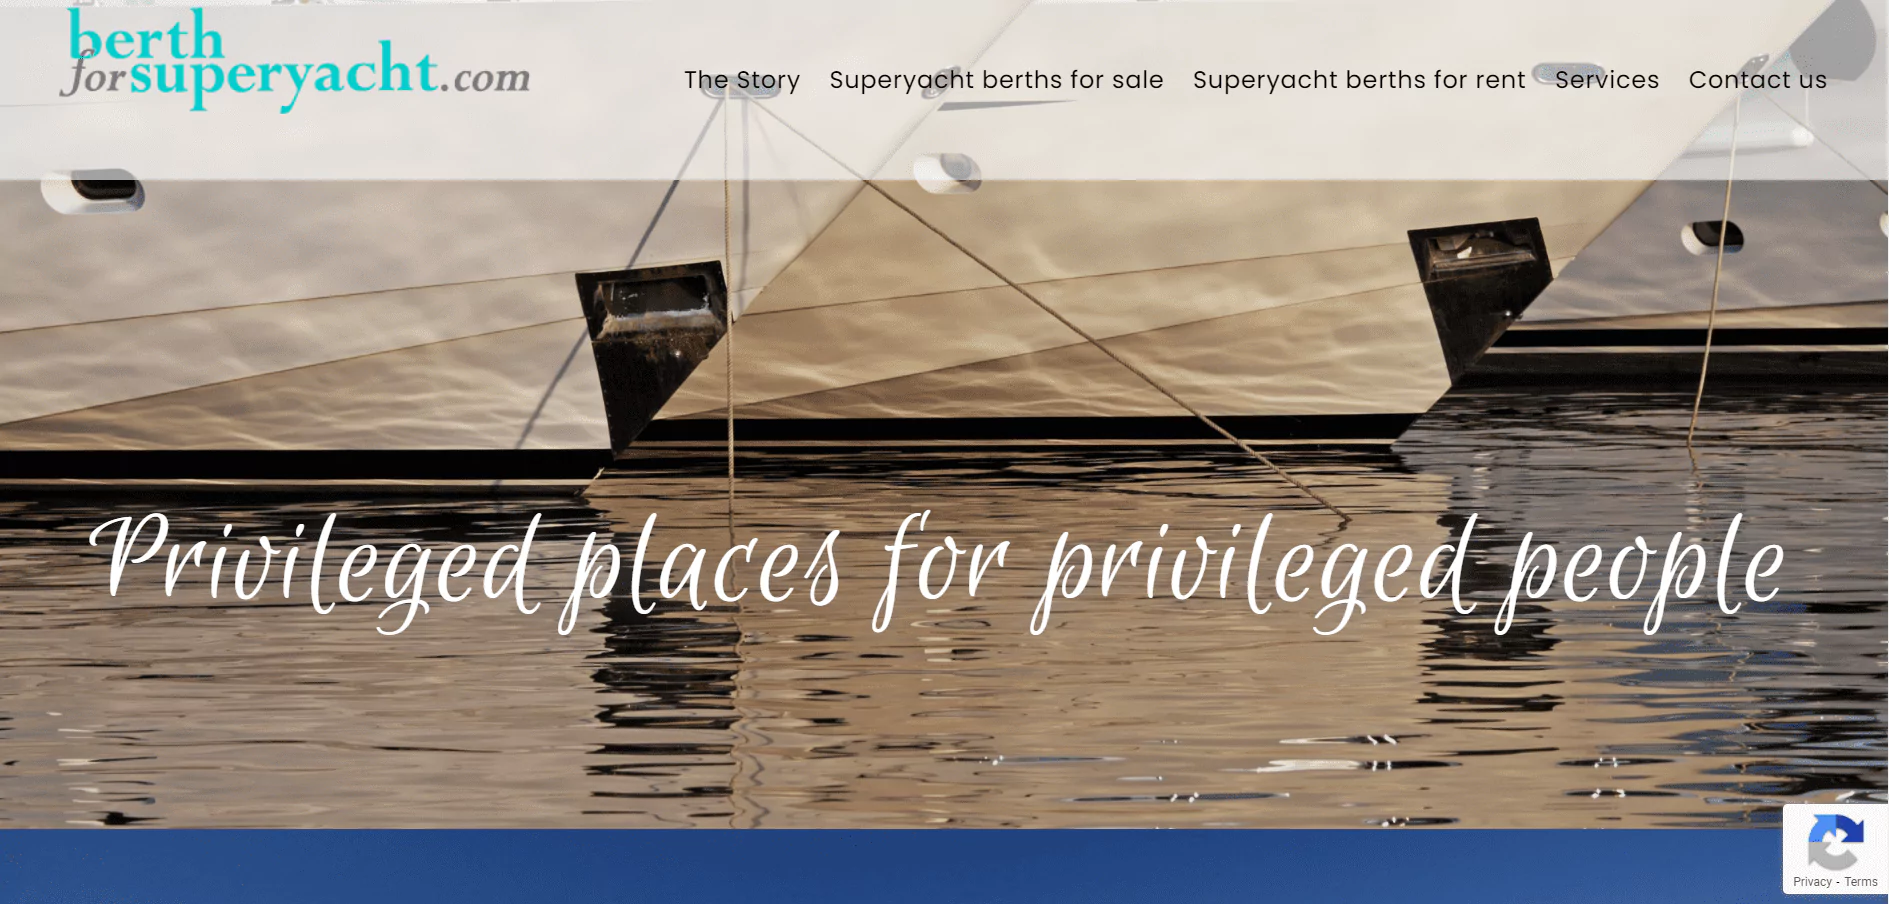 baccana-digital-consulting-wordpress-website-berth-for-superyacht-homepage